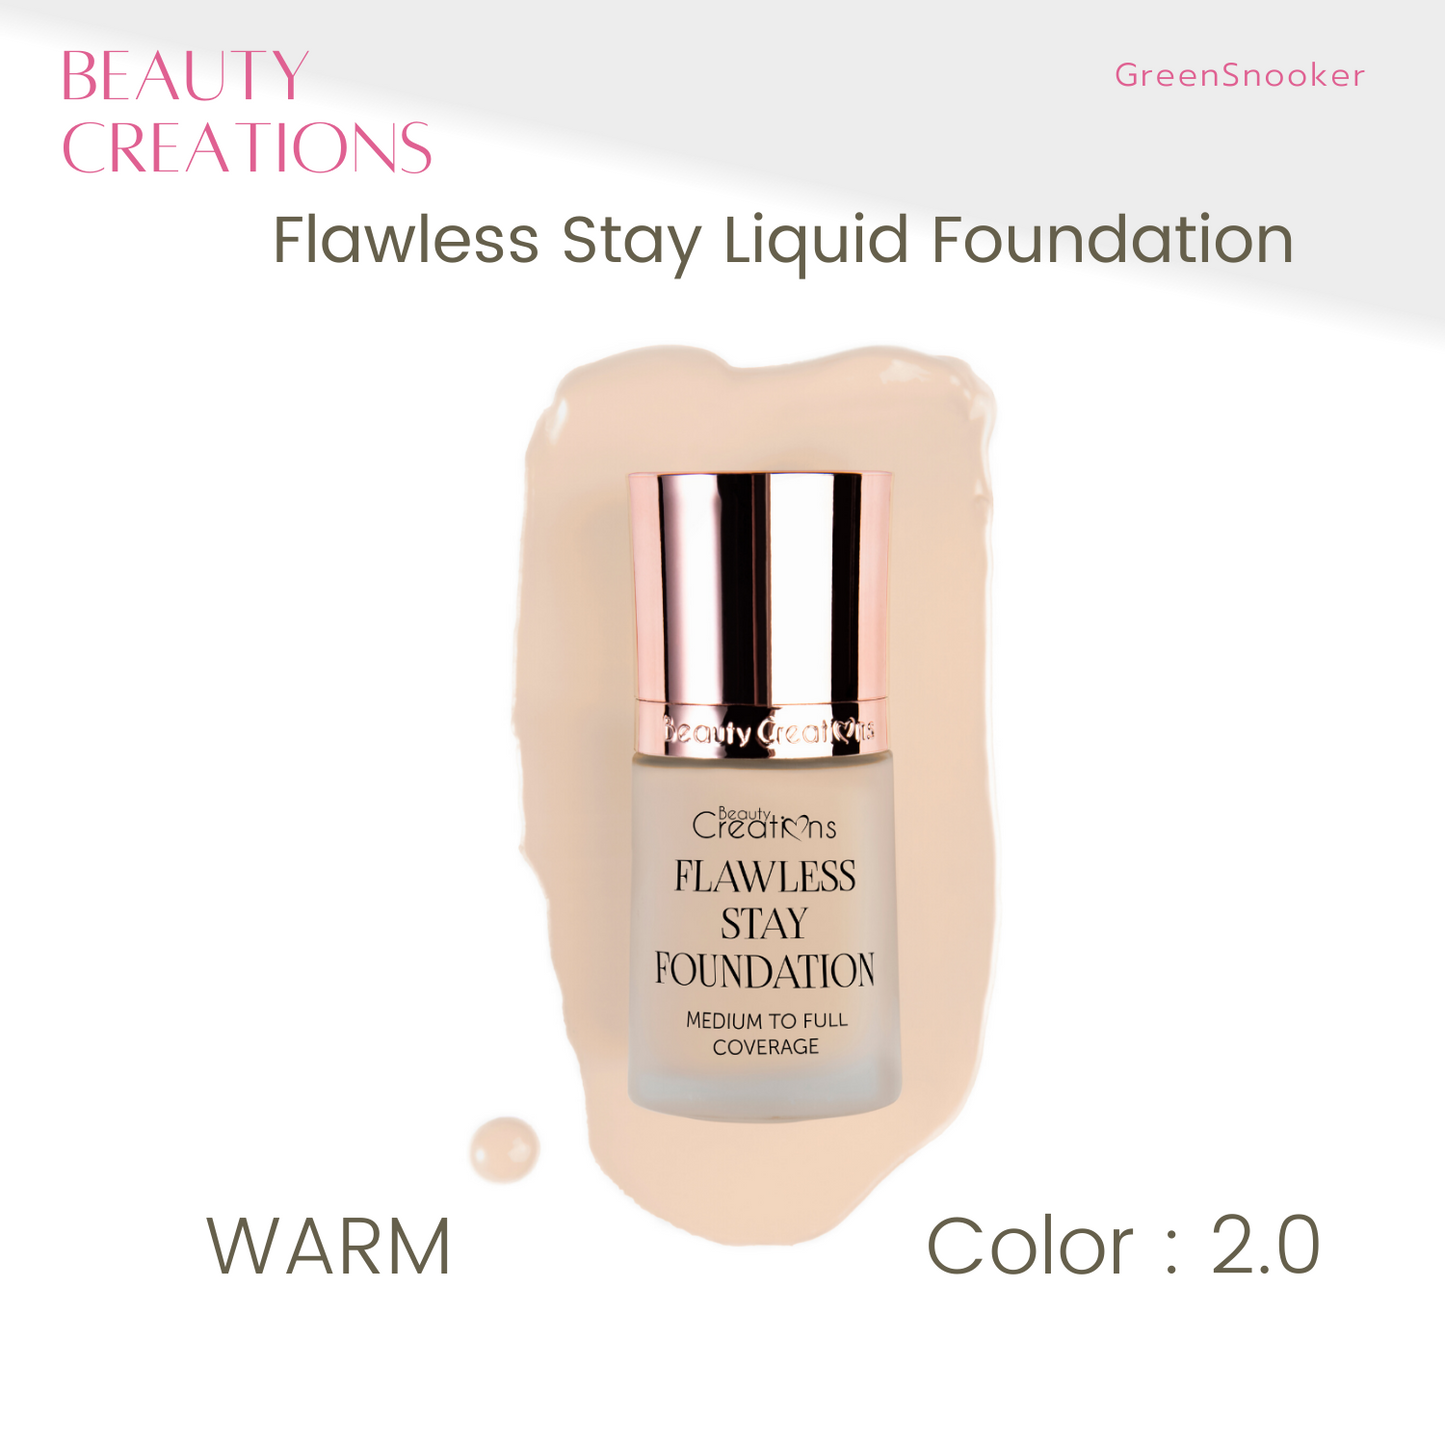 Beauty Creations, Flawless Stay Liquid Foundation